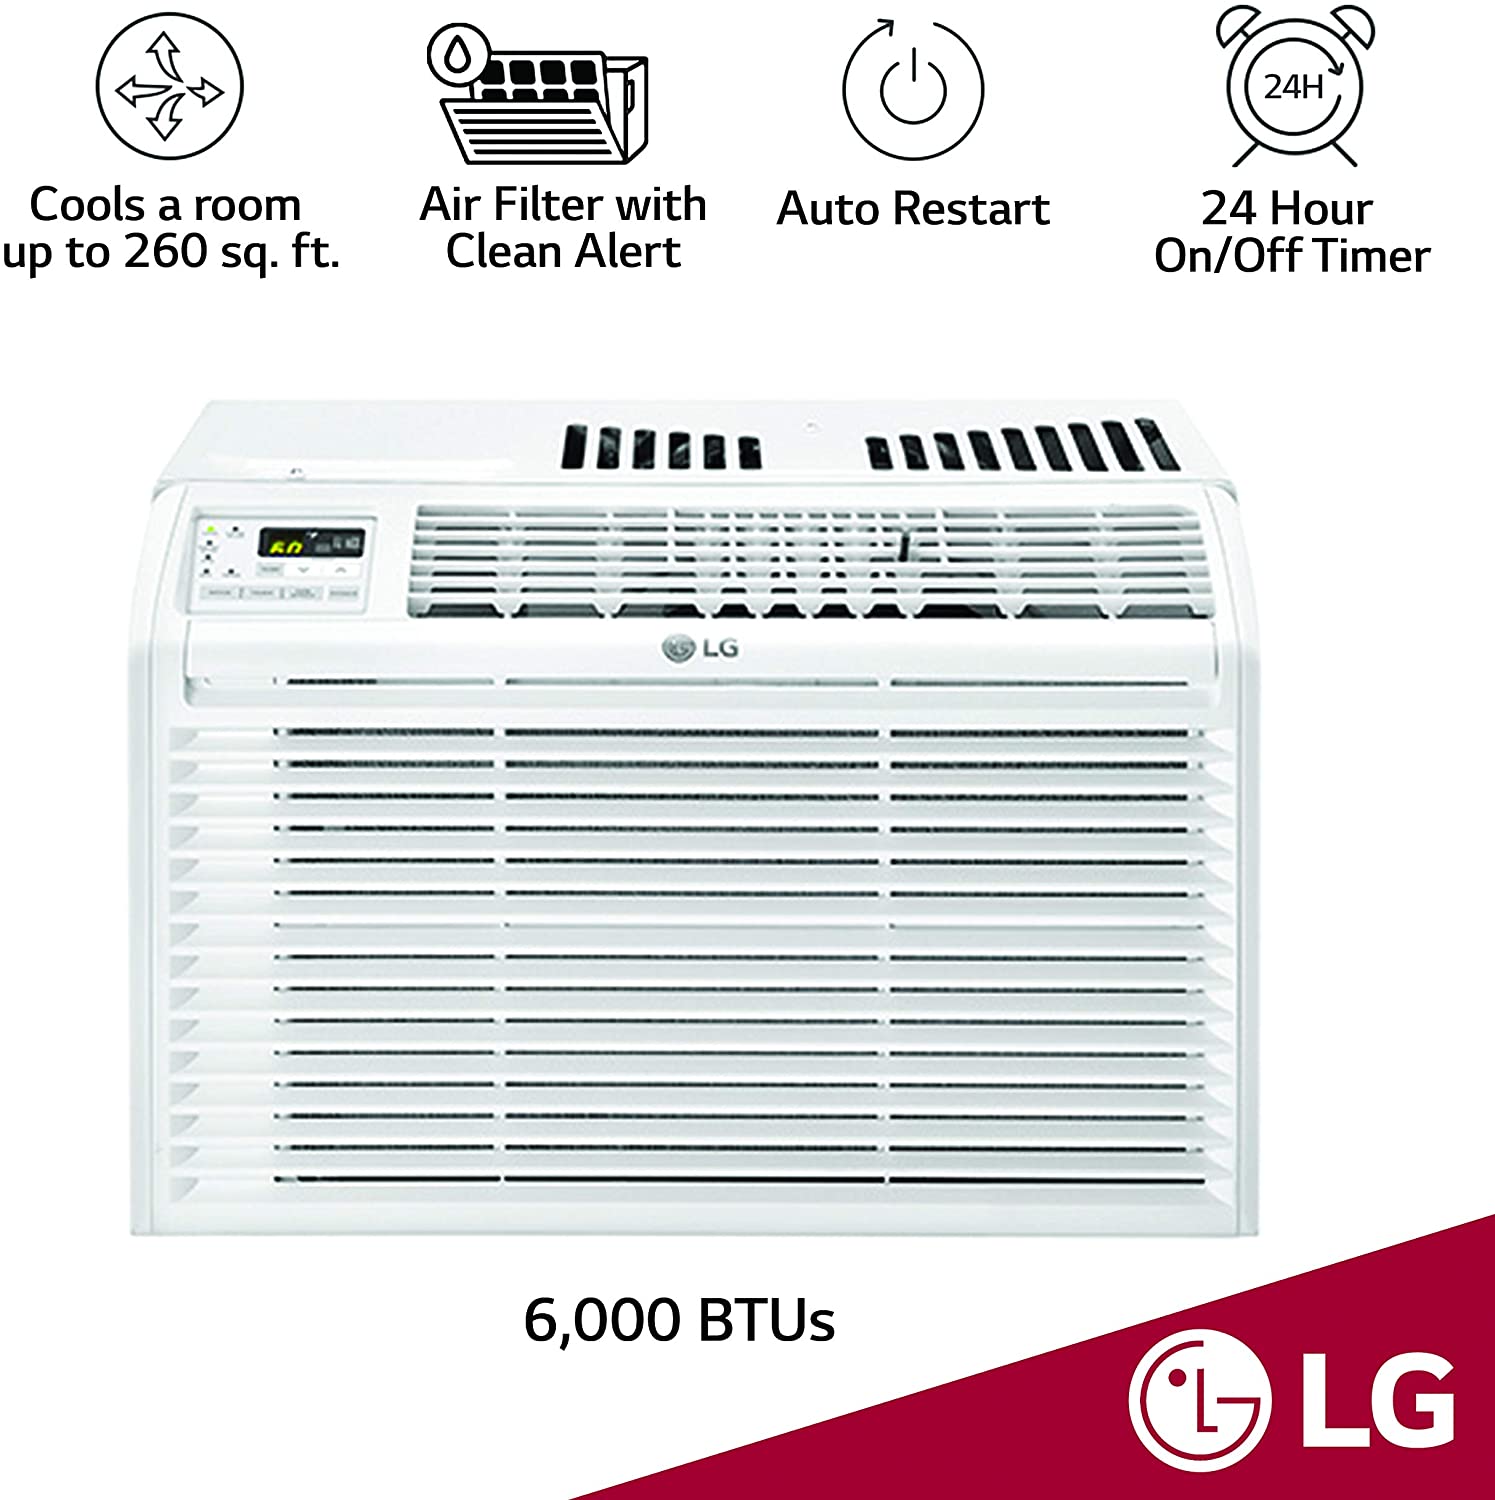 10 BEST 6000 BTU AIR CONDITIONERS 2022 [WINDOW & PORTABLE ACs] SMALL AC REVIEW FOR 200 - 250 Sq Ft All In One Cooling Gear Lab: Any Refrigerators Air Conditioners Freezers Ice Makers Coolers Fans Reviewed And Compared.